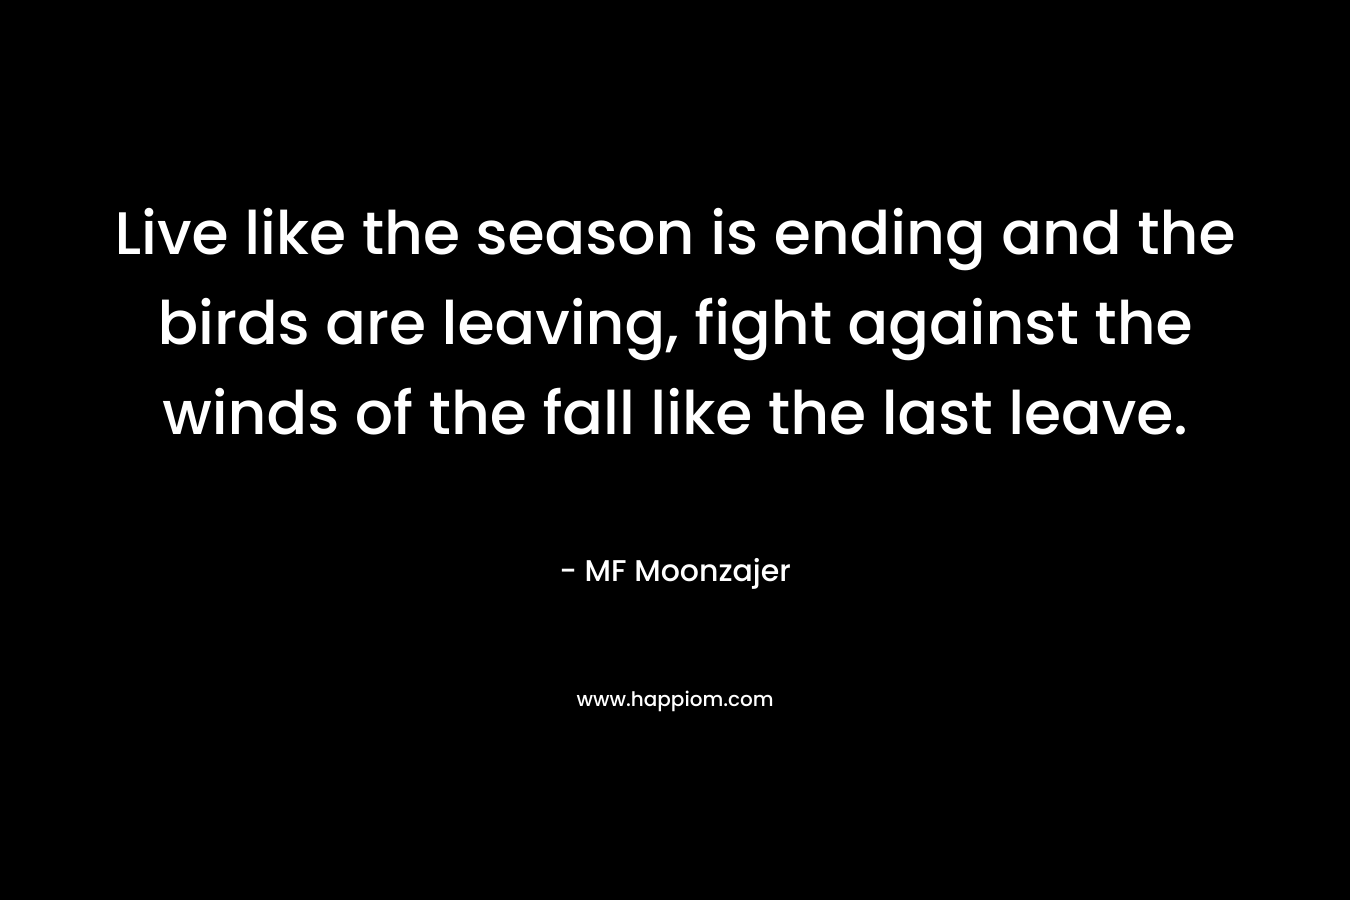 Live like the season is ending and the birds are leaving, fight against the winds of the fall like the last leave.